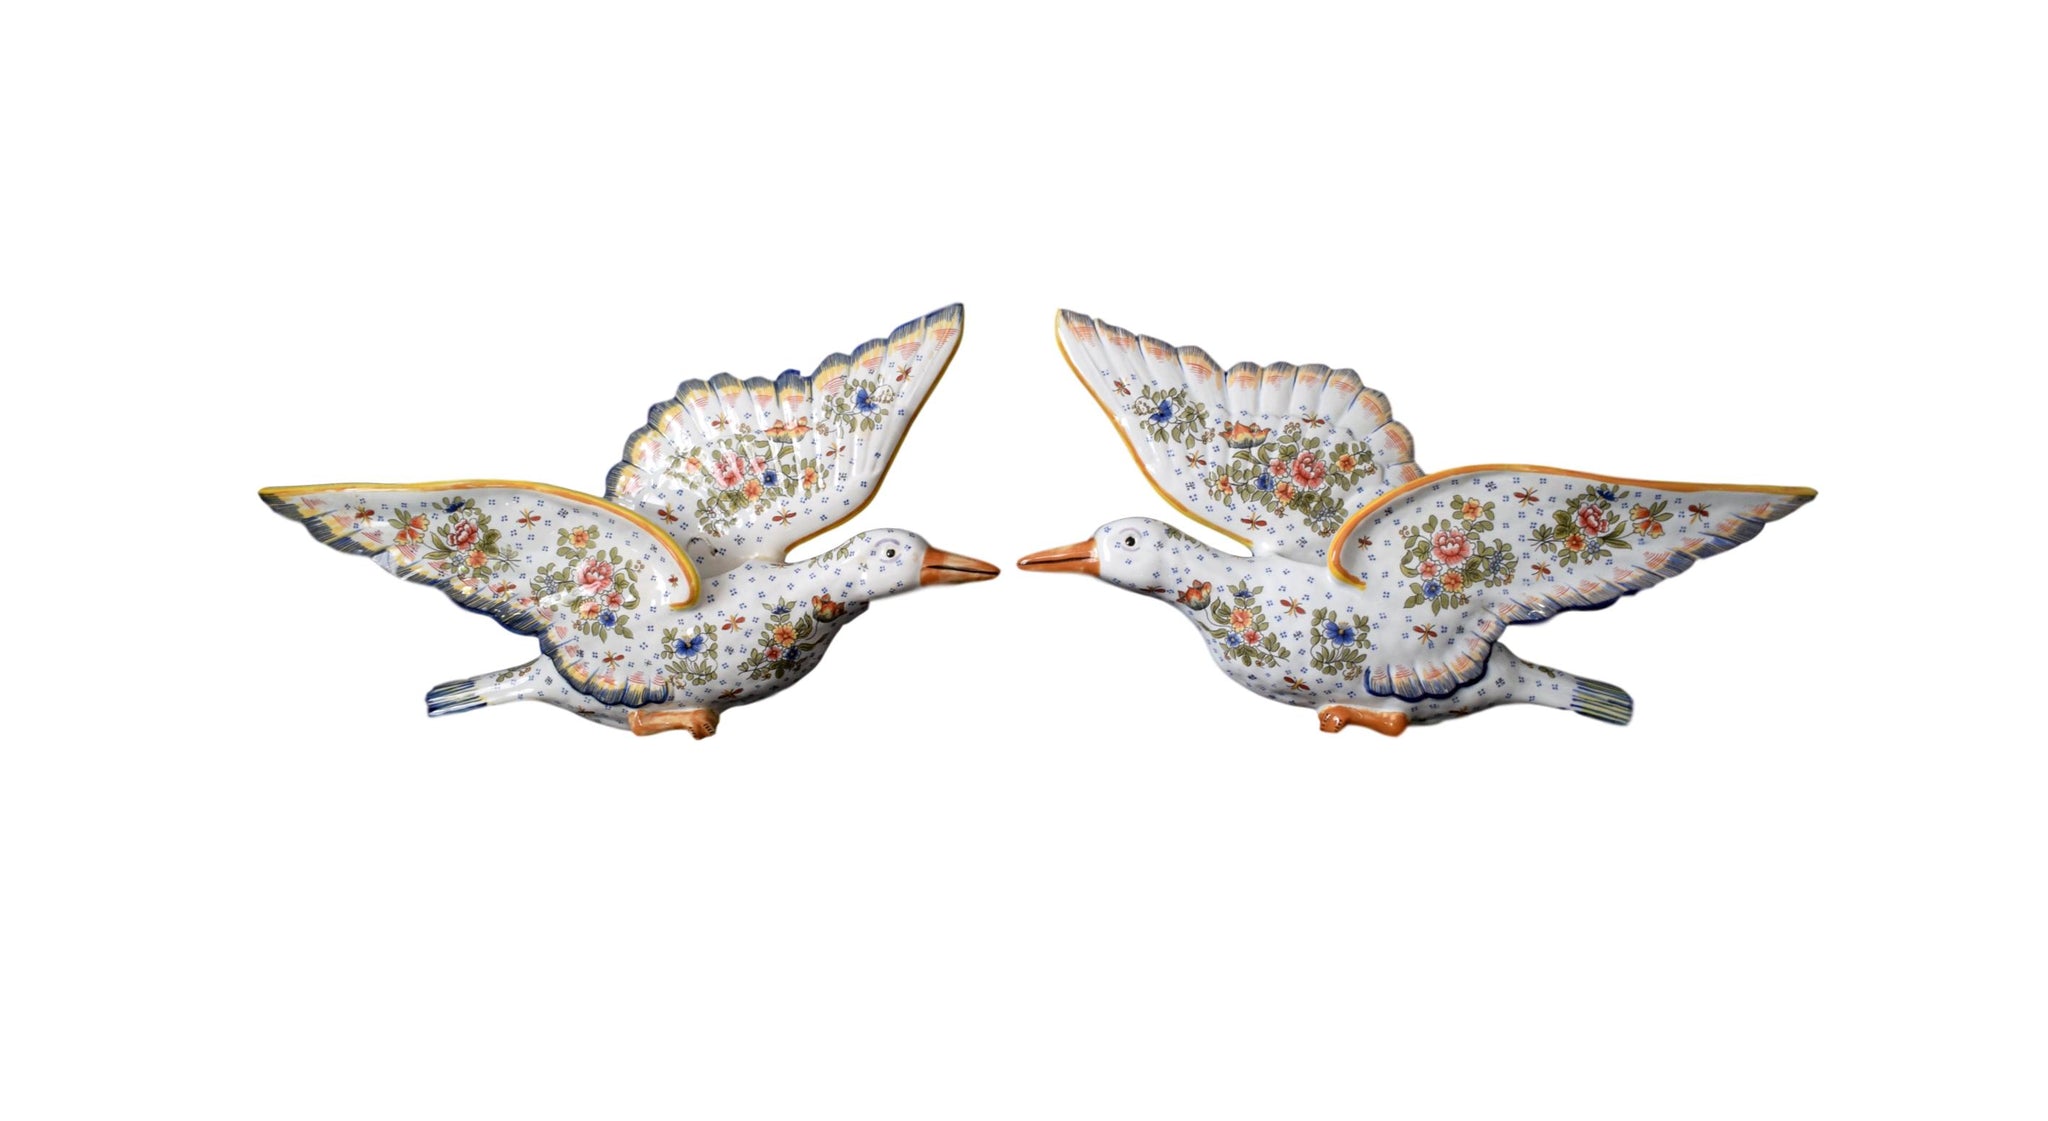 Rare Pair of Gooses Wall Pocket French Antique Hand Painted Desvres Fourmaintraux Rouen Decor - Majolica Figural Flower Wall Vases